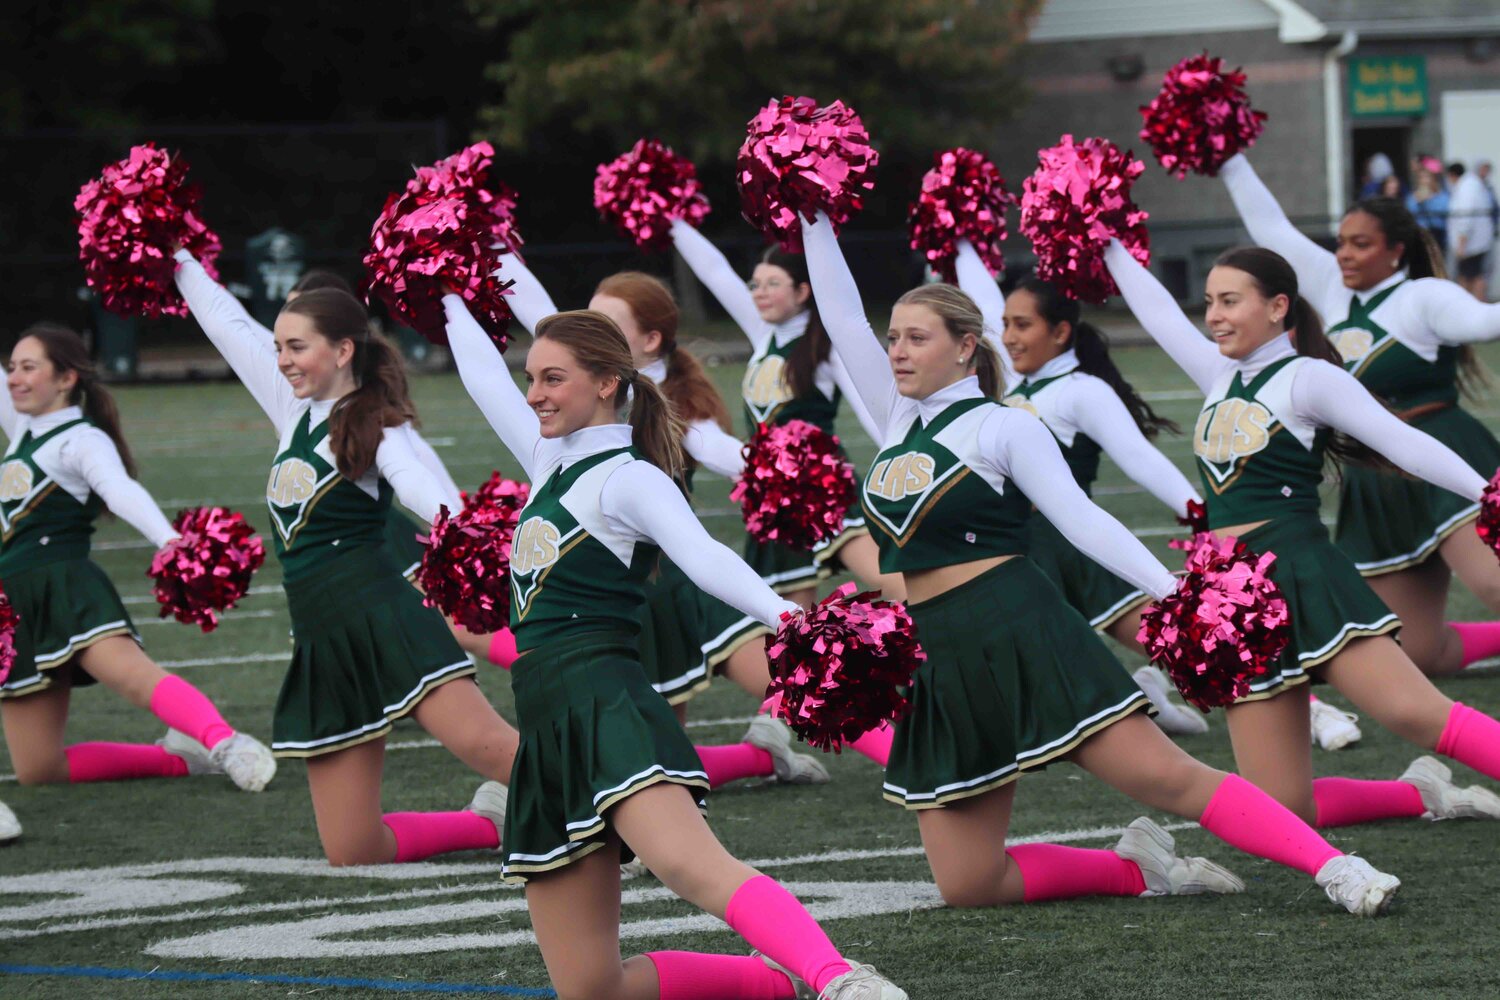 The varsity cheerleaders worked hard especially during their halftime performance.